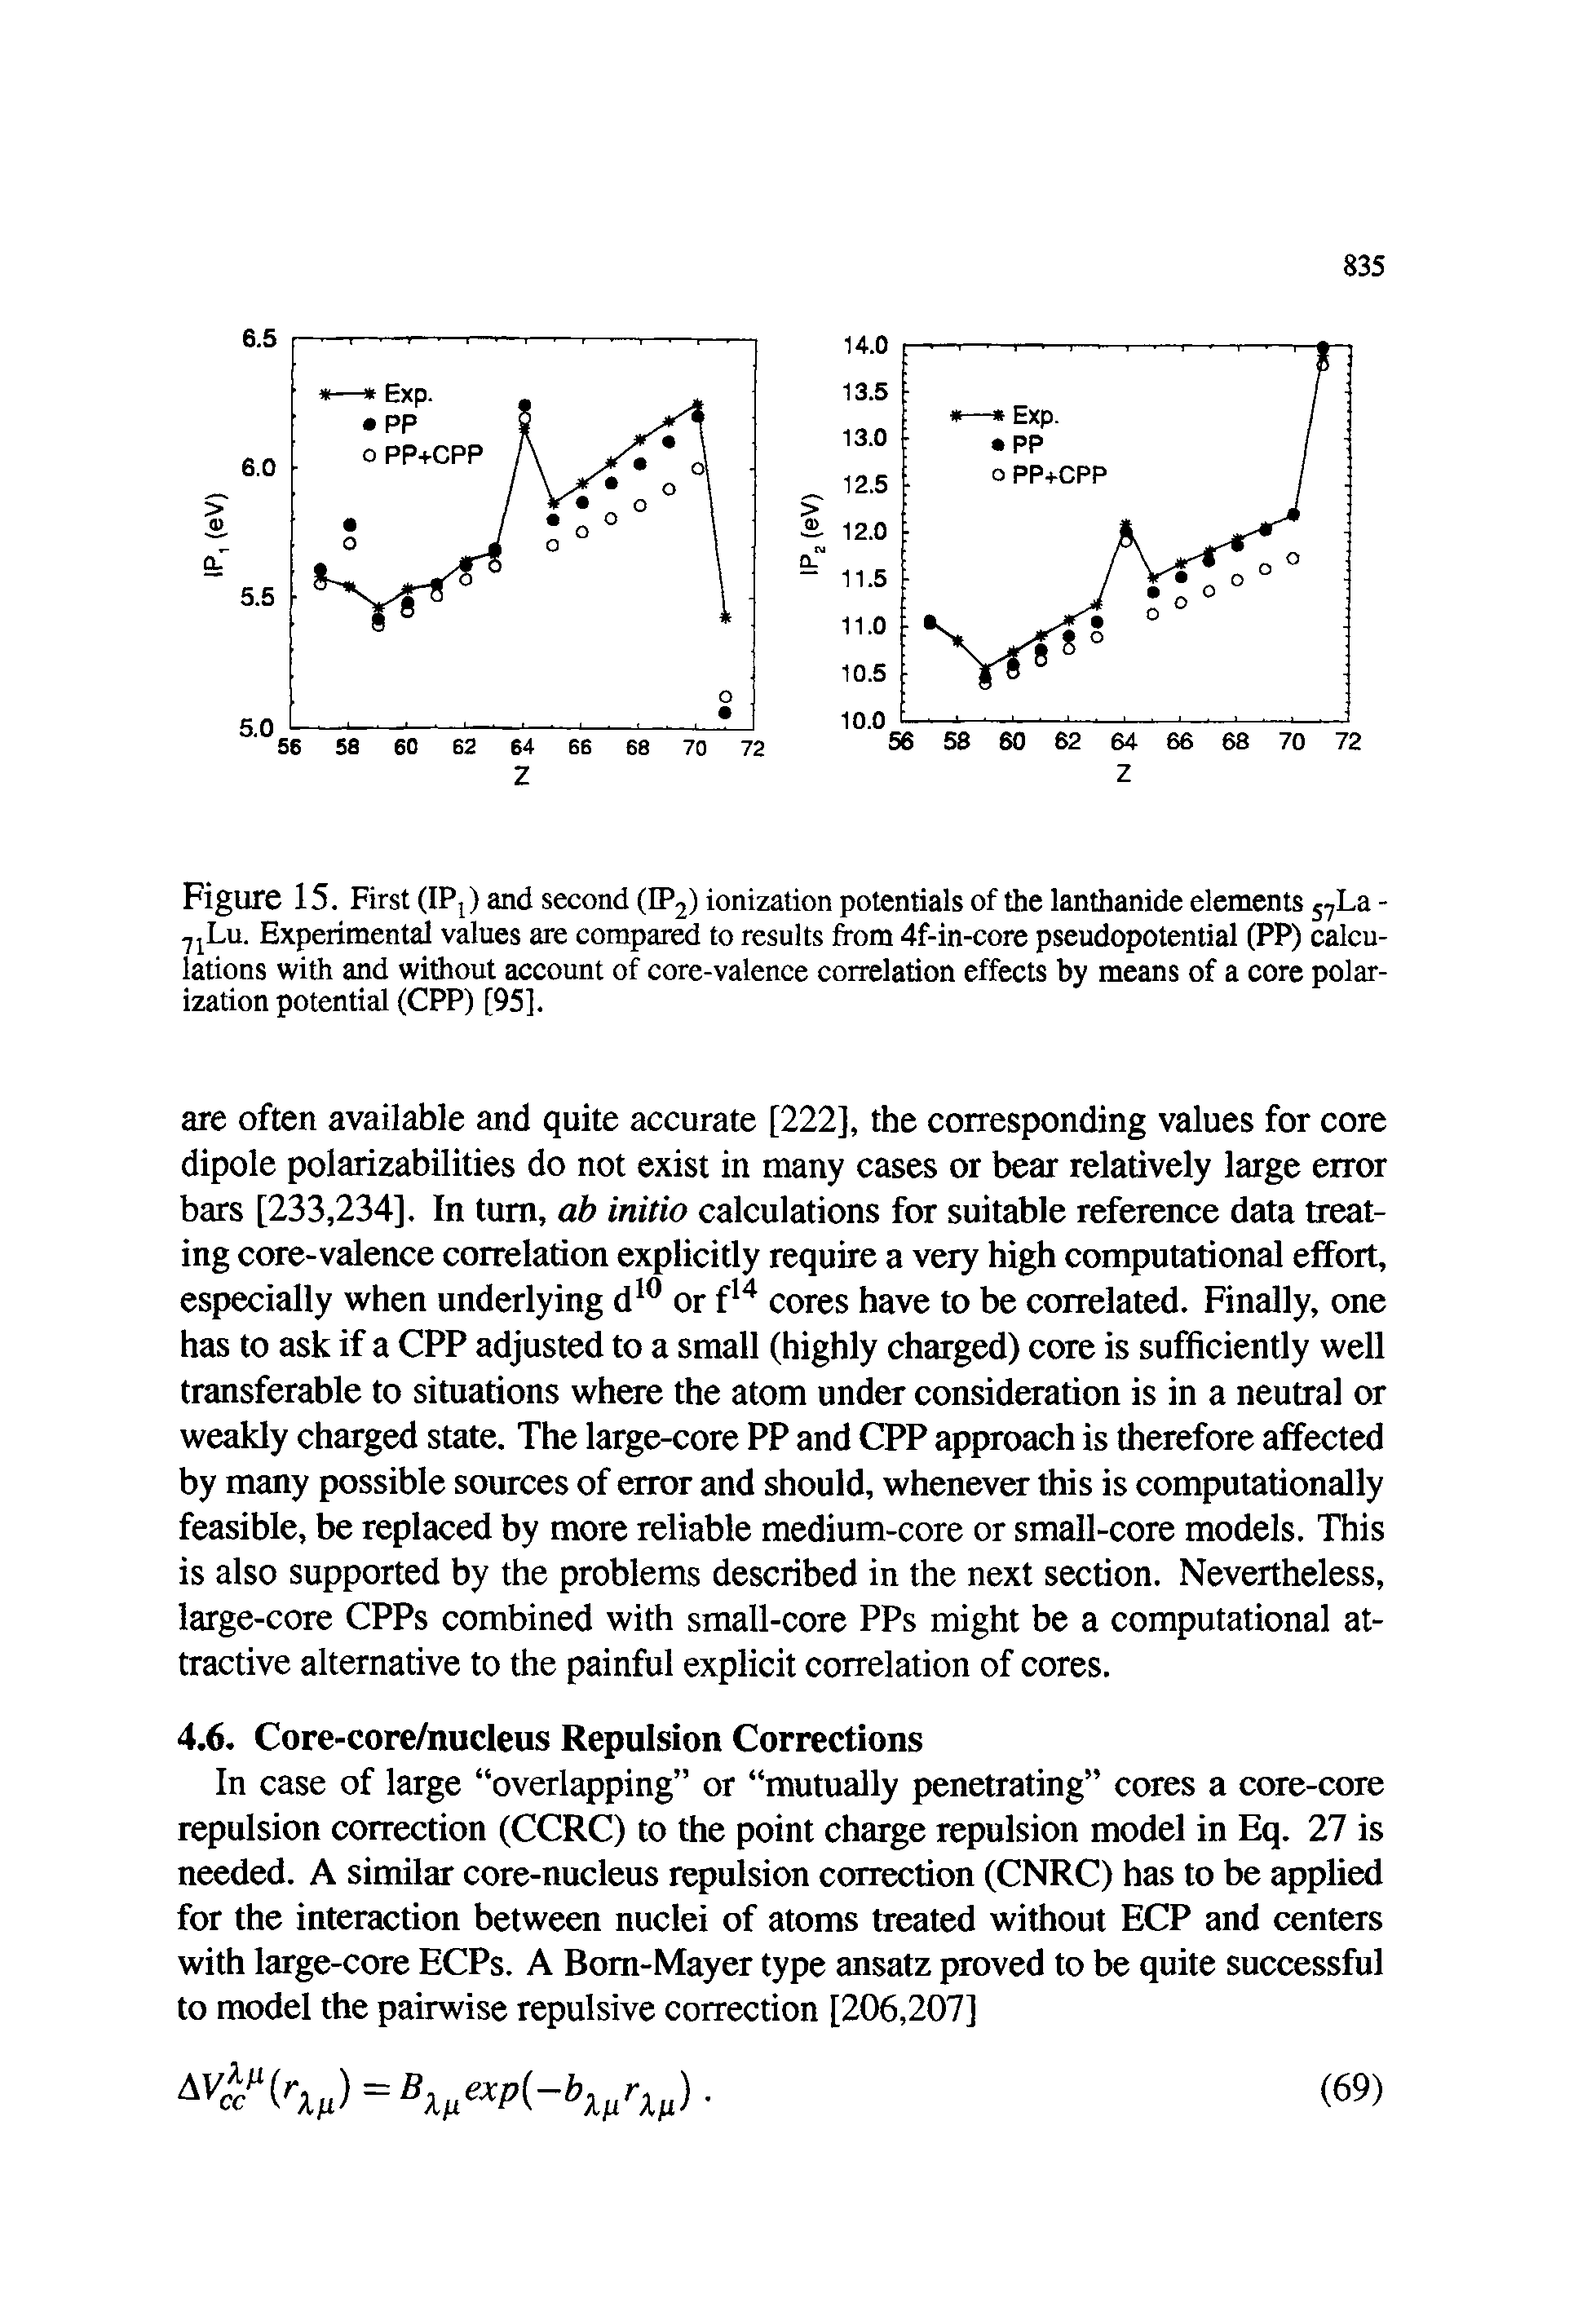 Figure 15. First (IPj) and second (IP2) ionization potentials of the lanthanide elements j La -2jLu. Experimental values are compared to results from 4f-in-core pseudopotential (PP) calculations with and without account of core-valence correlation effects by means of a core polarization potential (CPP) [95].